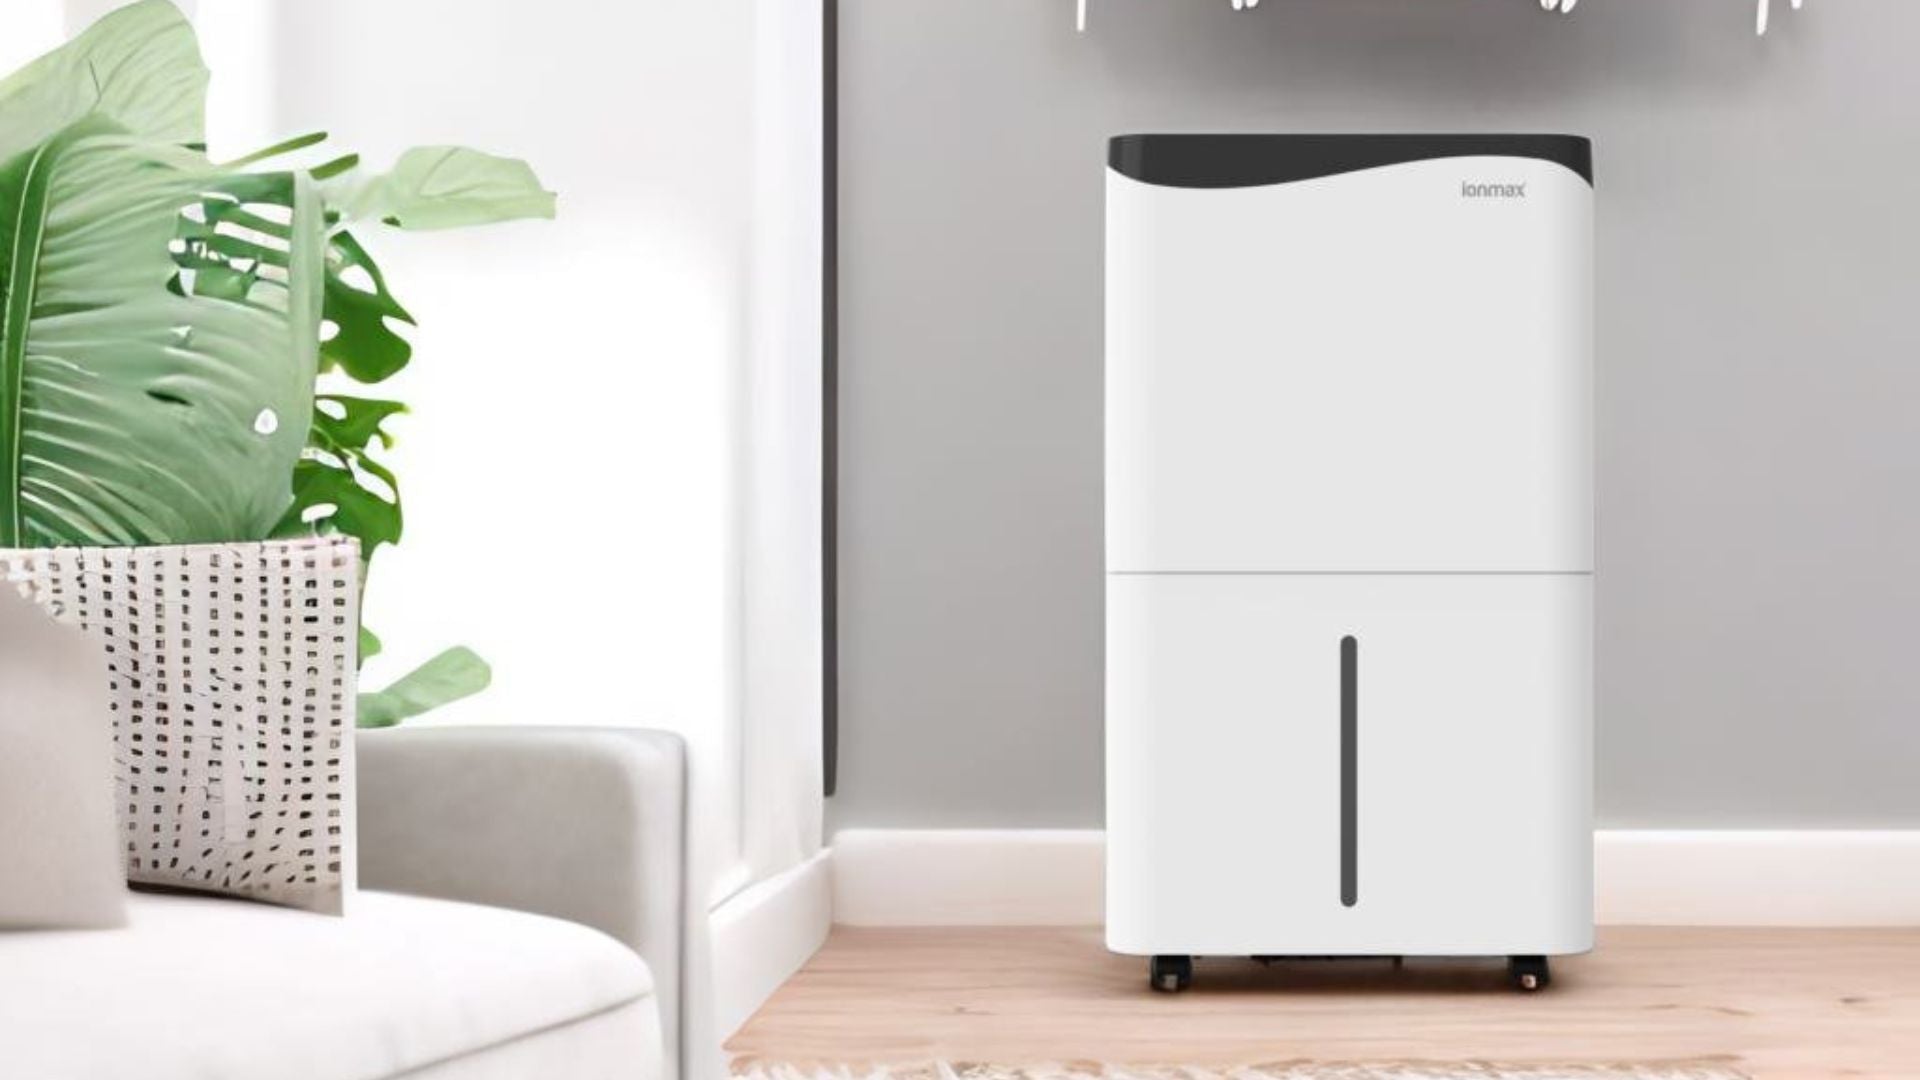 Load video: The Ionmax Rhine dehumidifier for living rooms